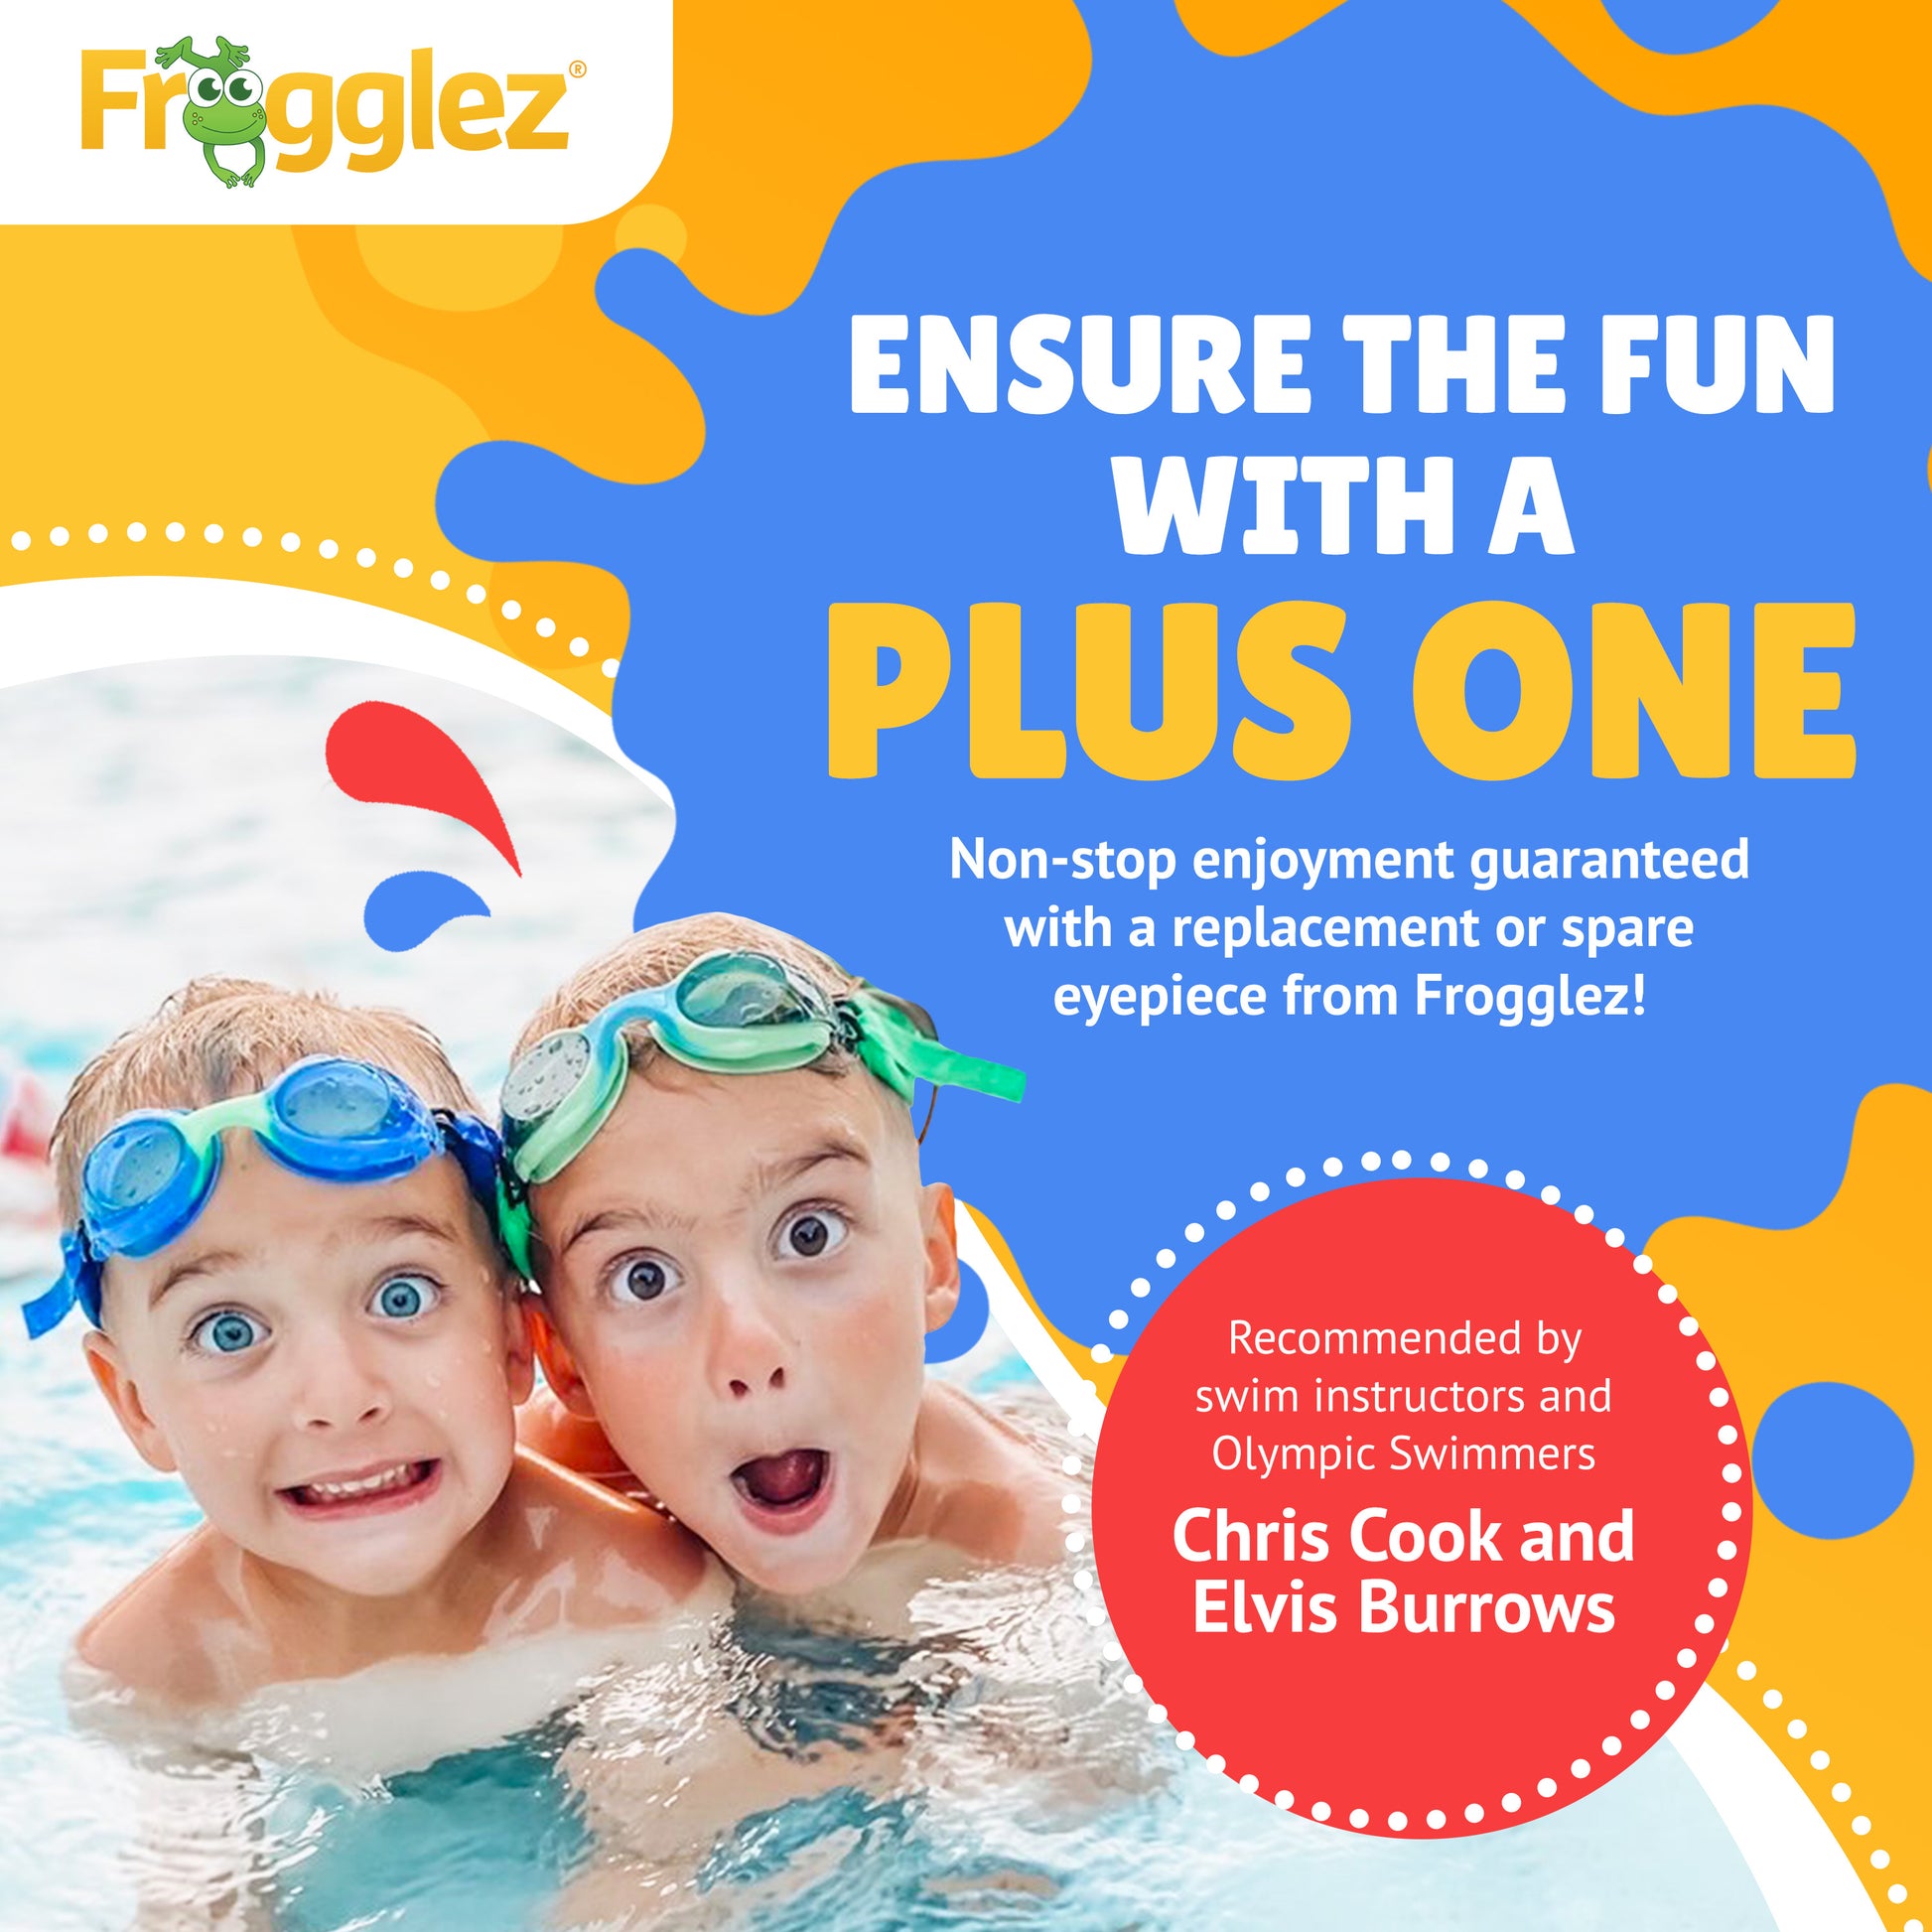 Frogglez. Text reads: Ensure the fun with a plus one. Non-stop enjoyment guaranteed with a replacement or spare eyepiece from Frogglez. Recommended by swim instructors and Olympic swimmer Chris Cook and Elvis Burrows. Pictured two kids in water wearing blue and green Frogglez Swim Goggles.